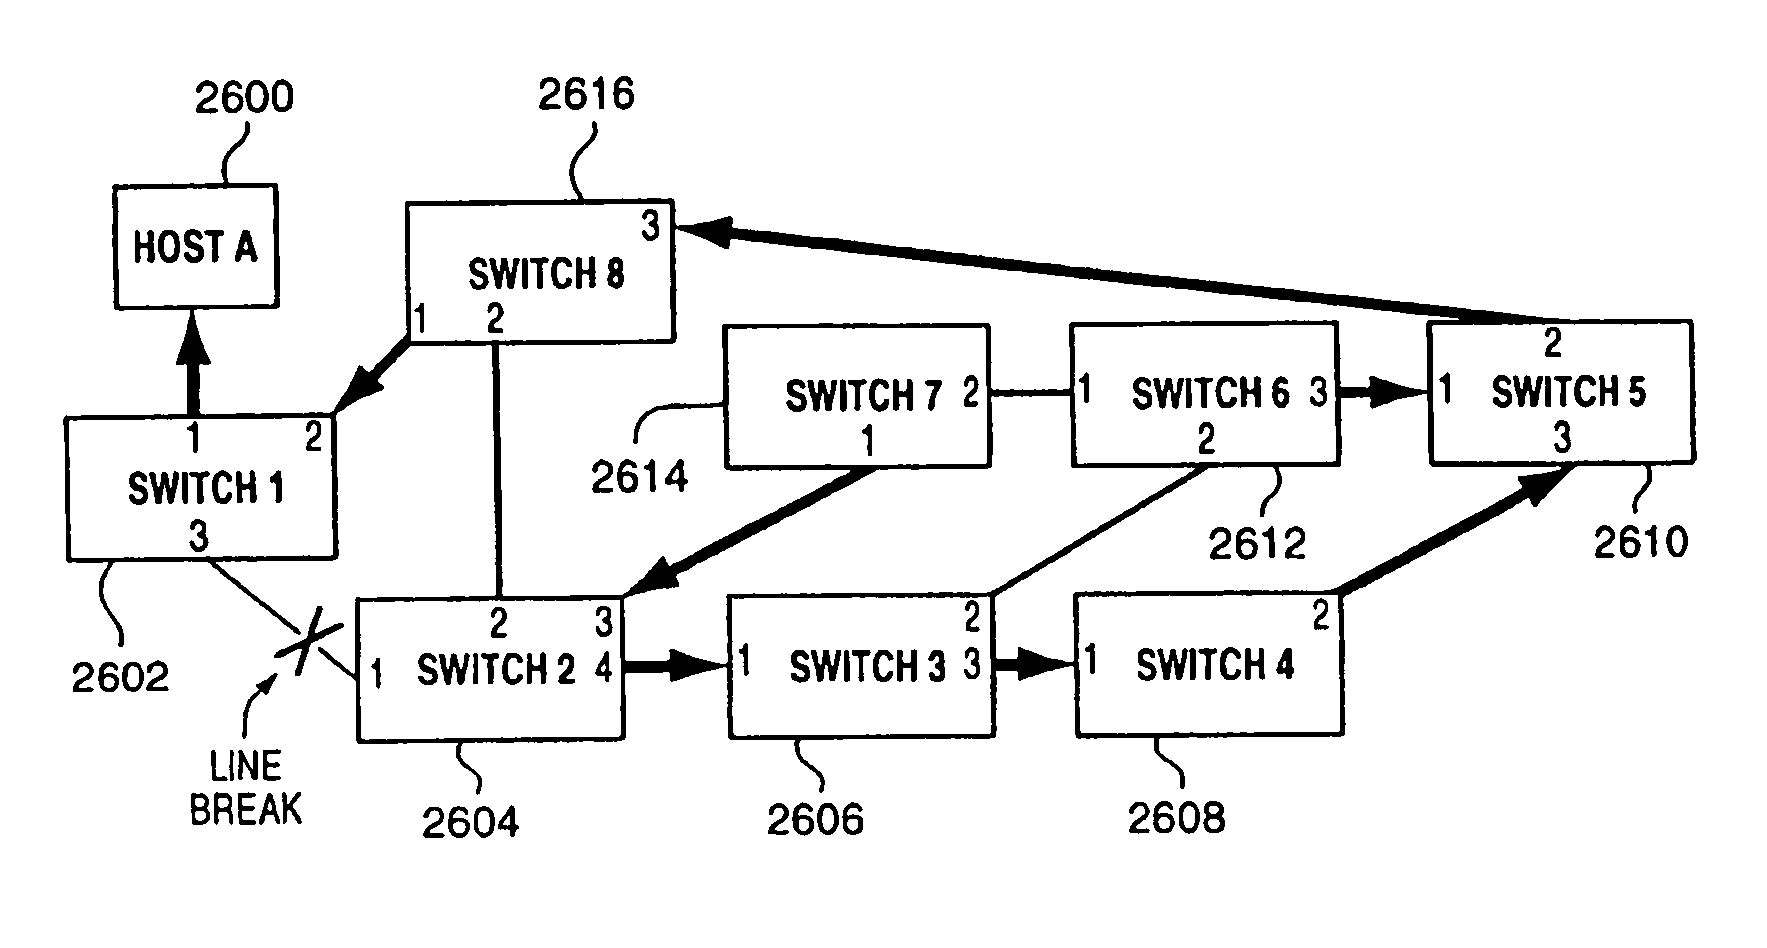 Path recovery on failure in load balancing switch protocols